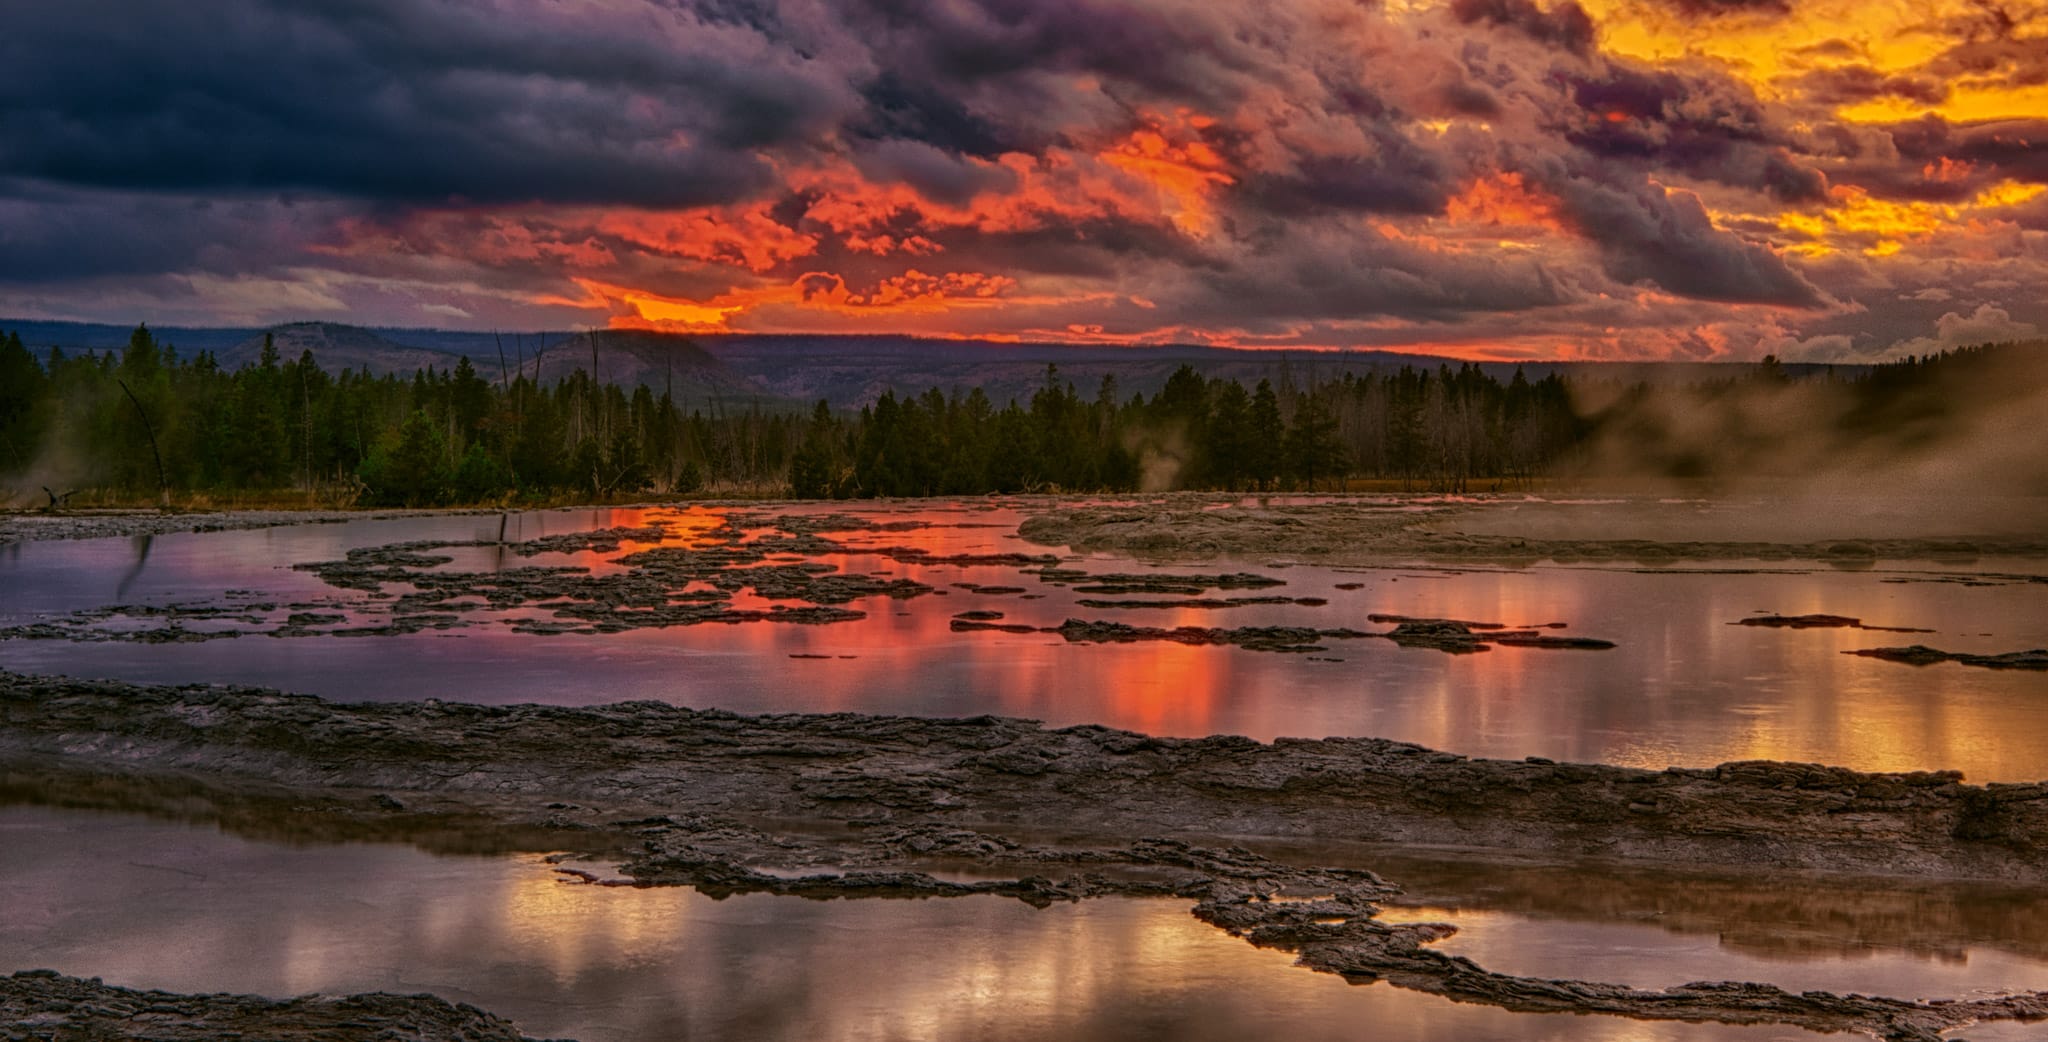 View of Great Fountain Geyser at sunset in Yellowstone National Park, Wyoming.